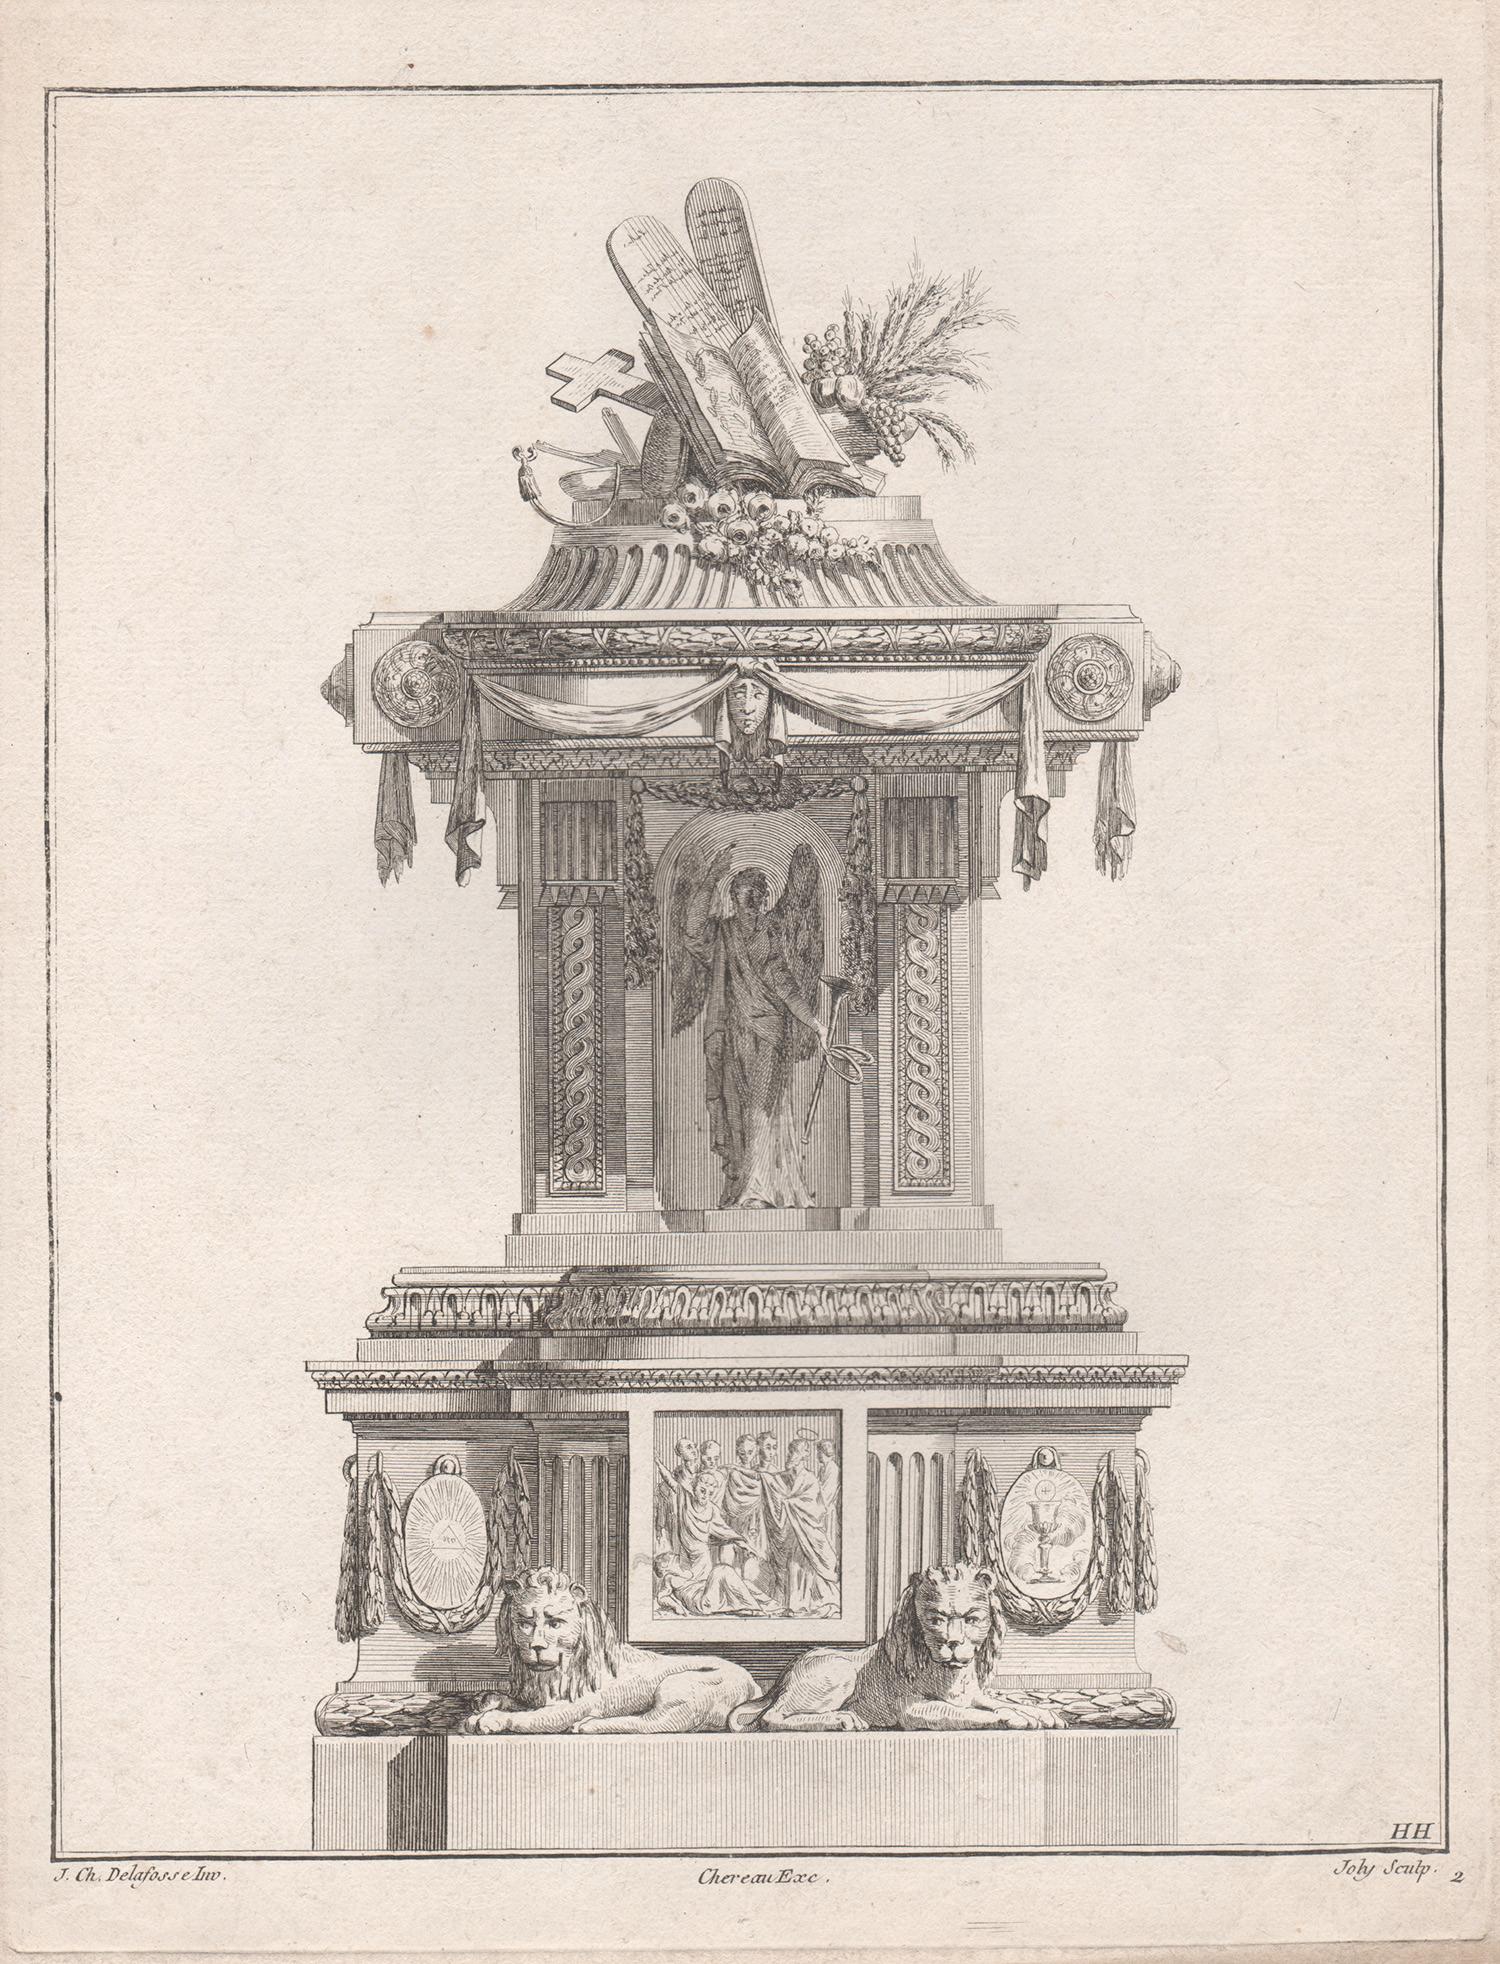 Joly after Jean-Charles Delafosse (1734-1791) Interior Print - French Neoclassical design for a Pulpit, engraving after Delafosse